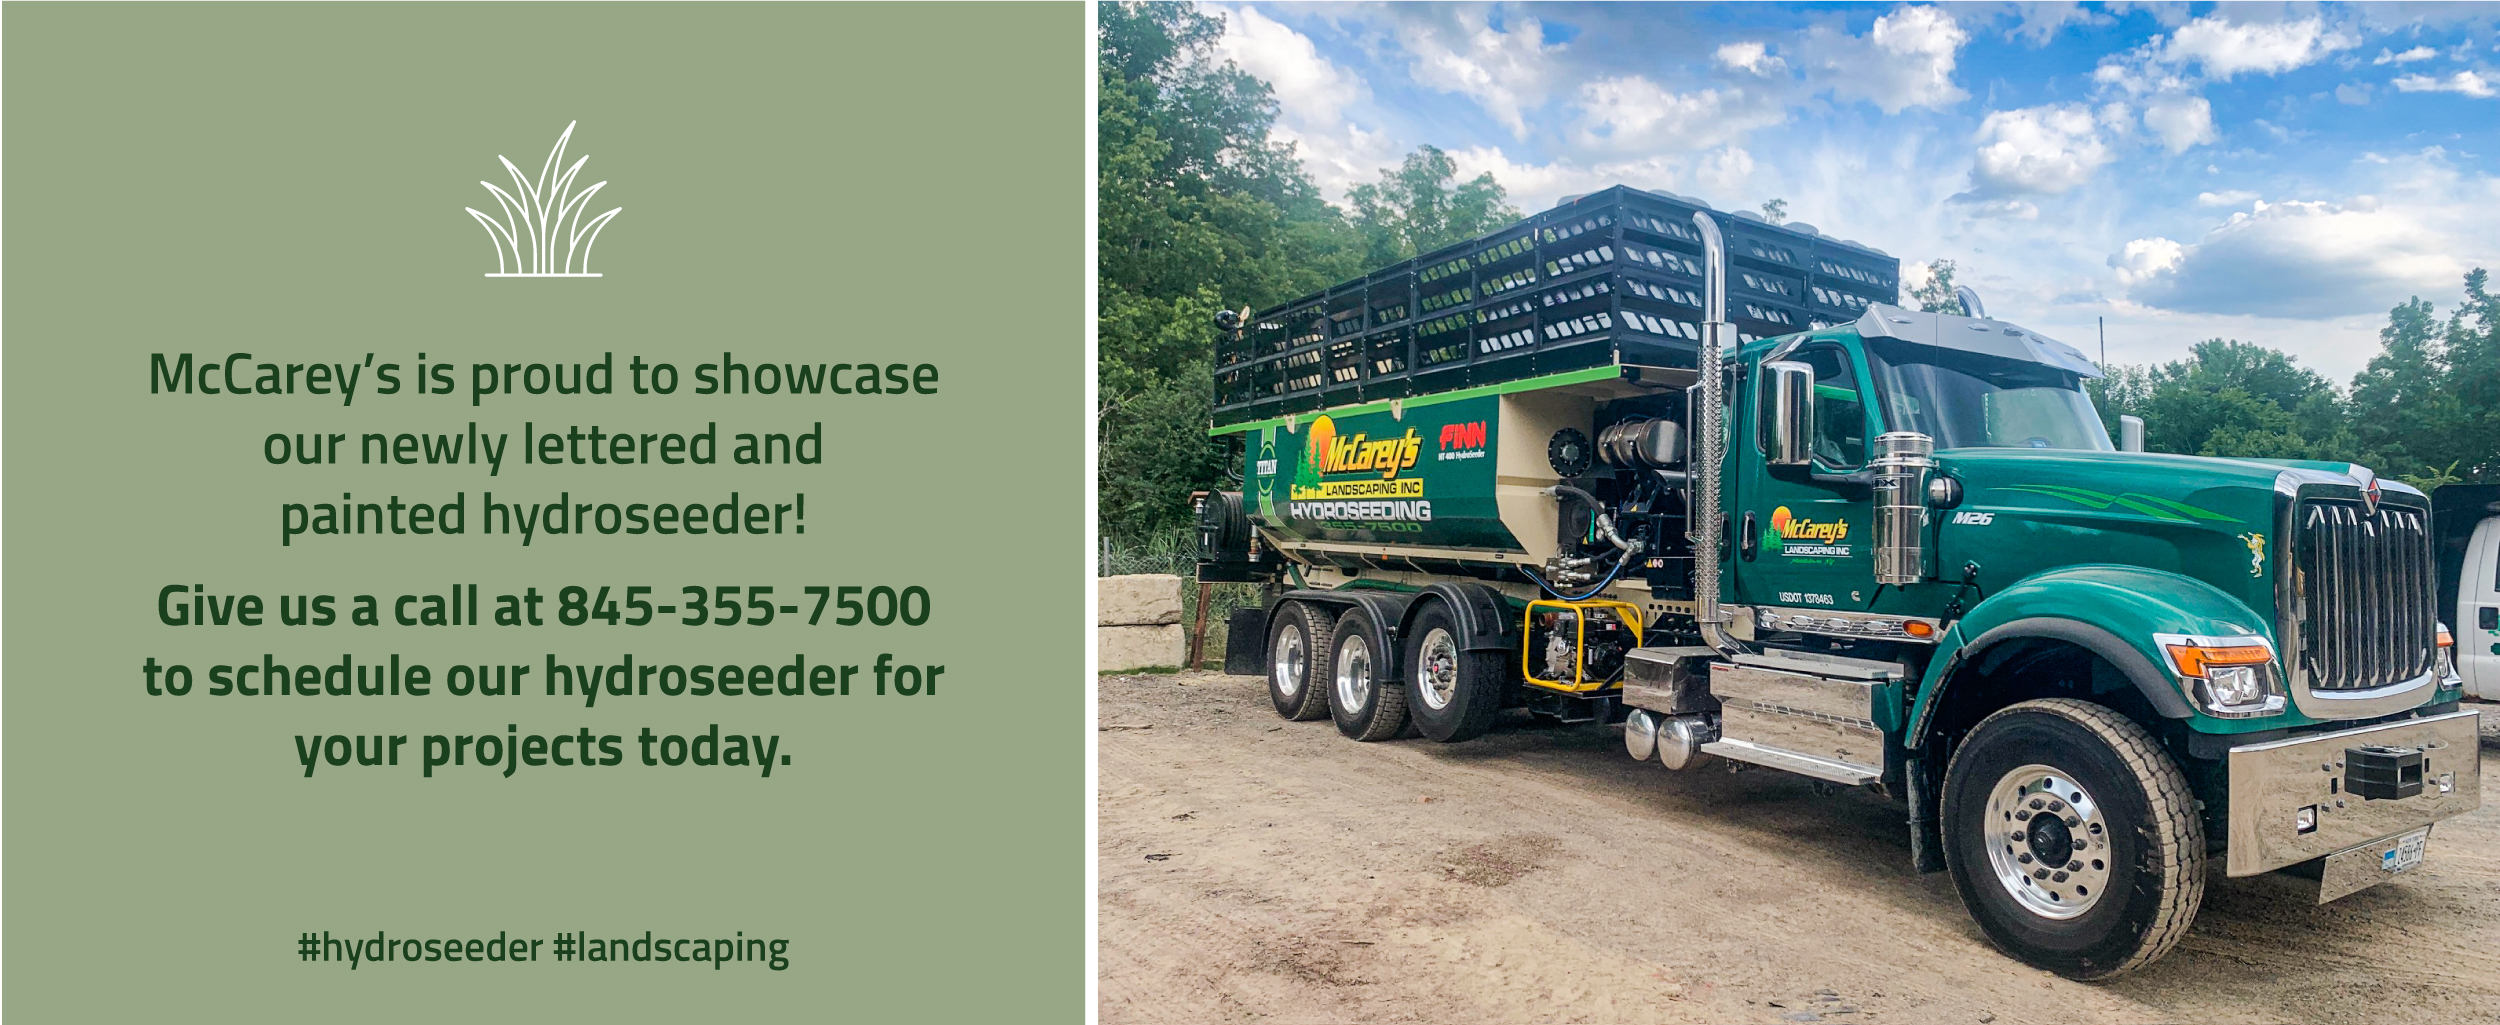 McCarey's is proud to showcase our newly lettered and painted hydroseeder! Givve us a call at 845-355-7500 to schedule our hydroseeder for your projects today.